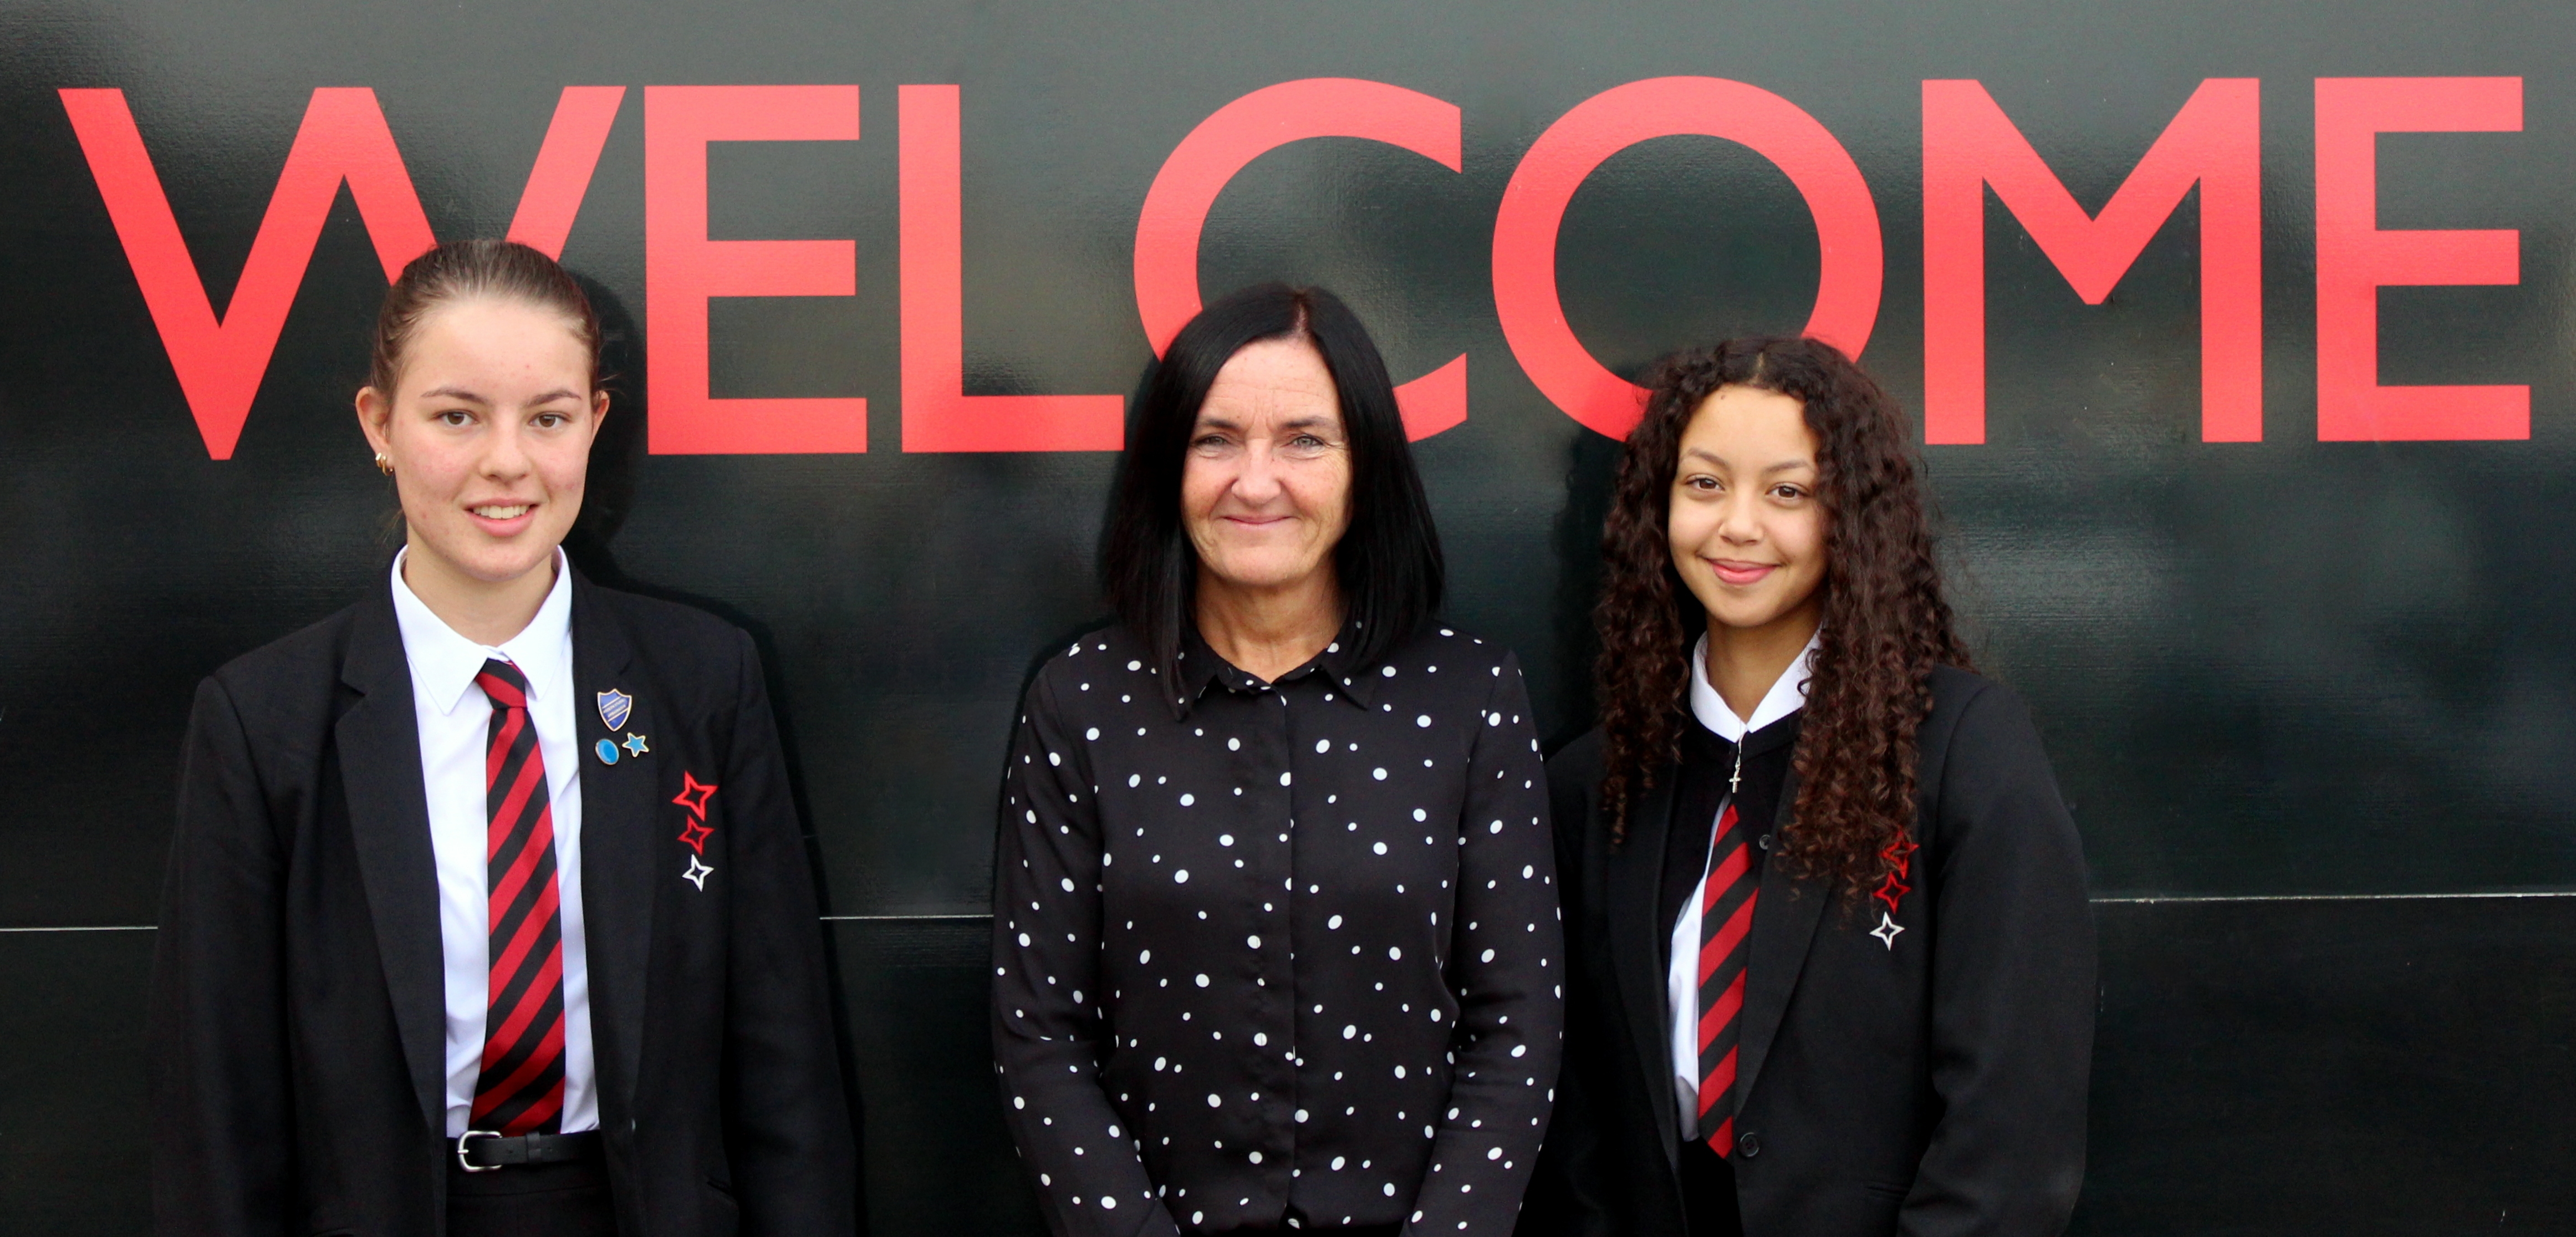 School Captain and Vice-Captain appointed Icon